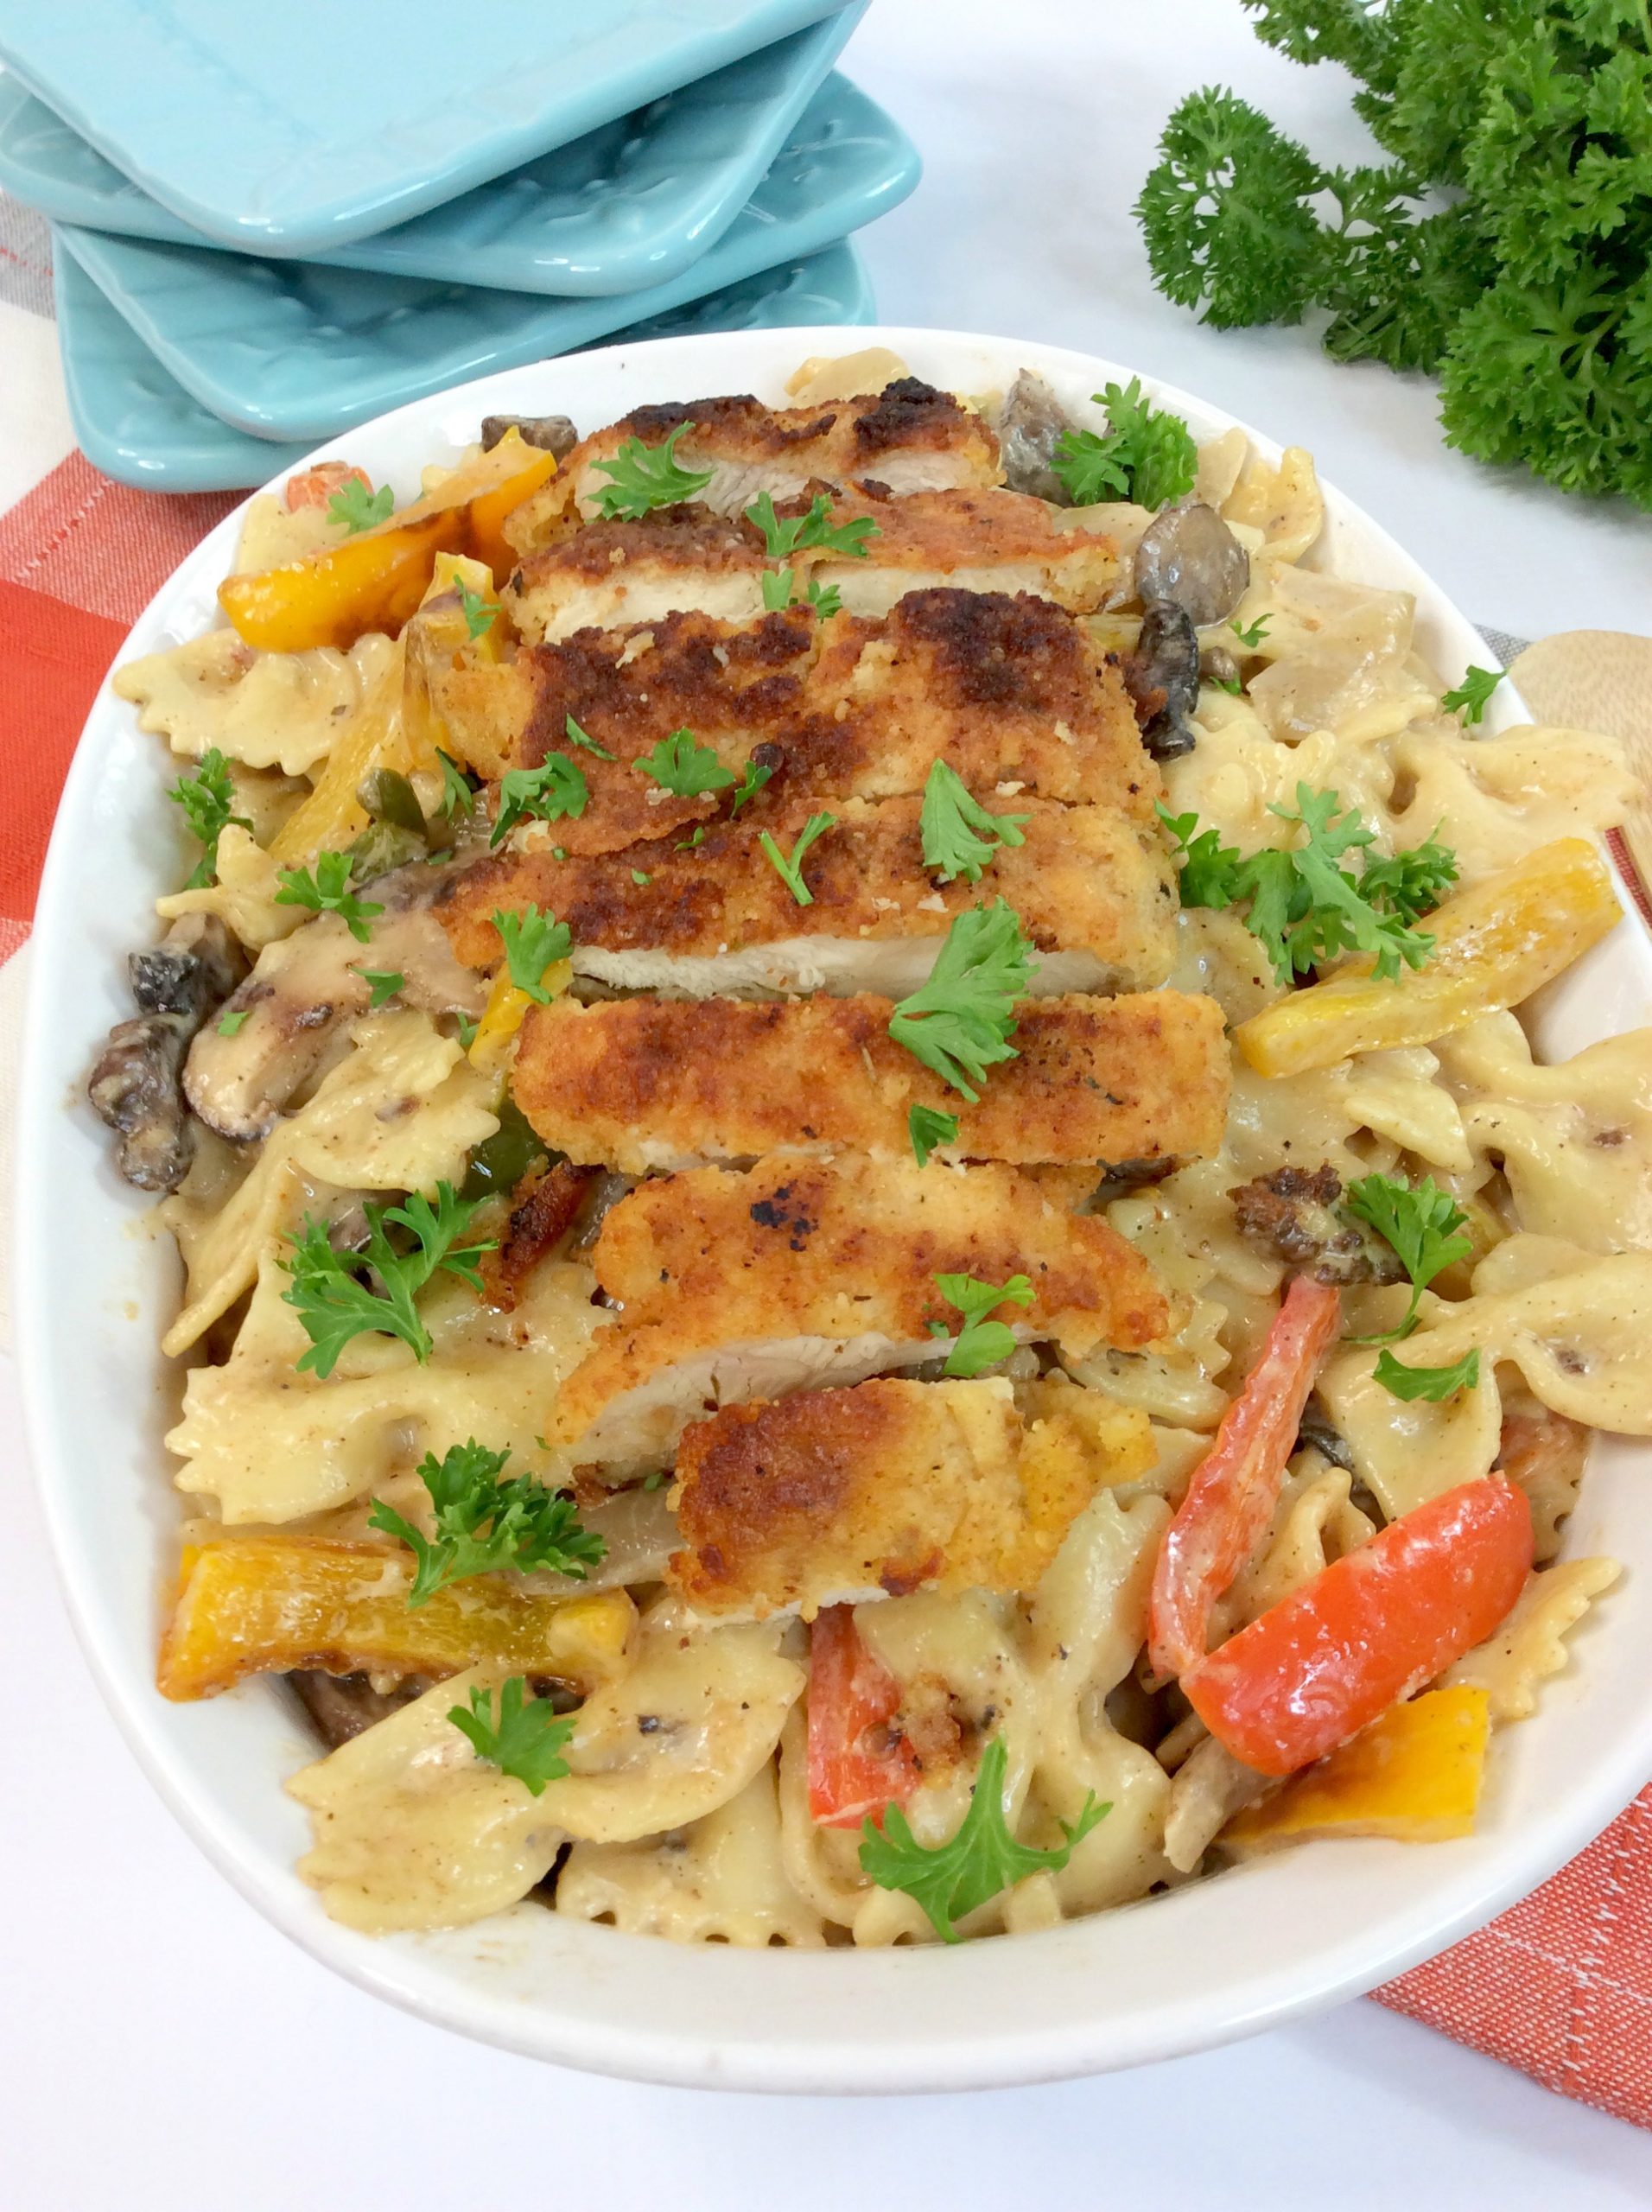 The Cheesecake Factory Louisiana Chicken Pasta garnished with parsley.